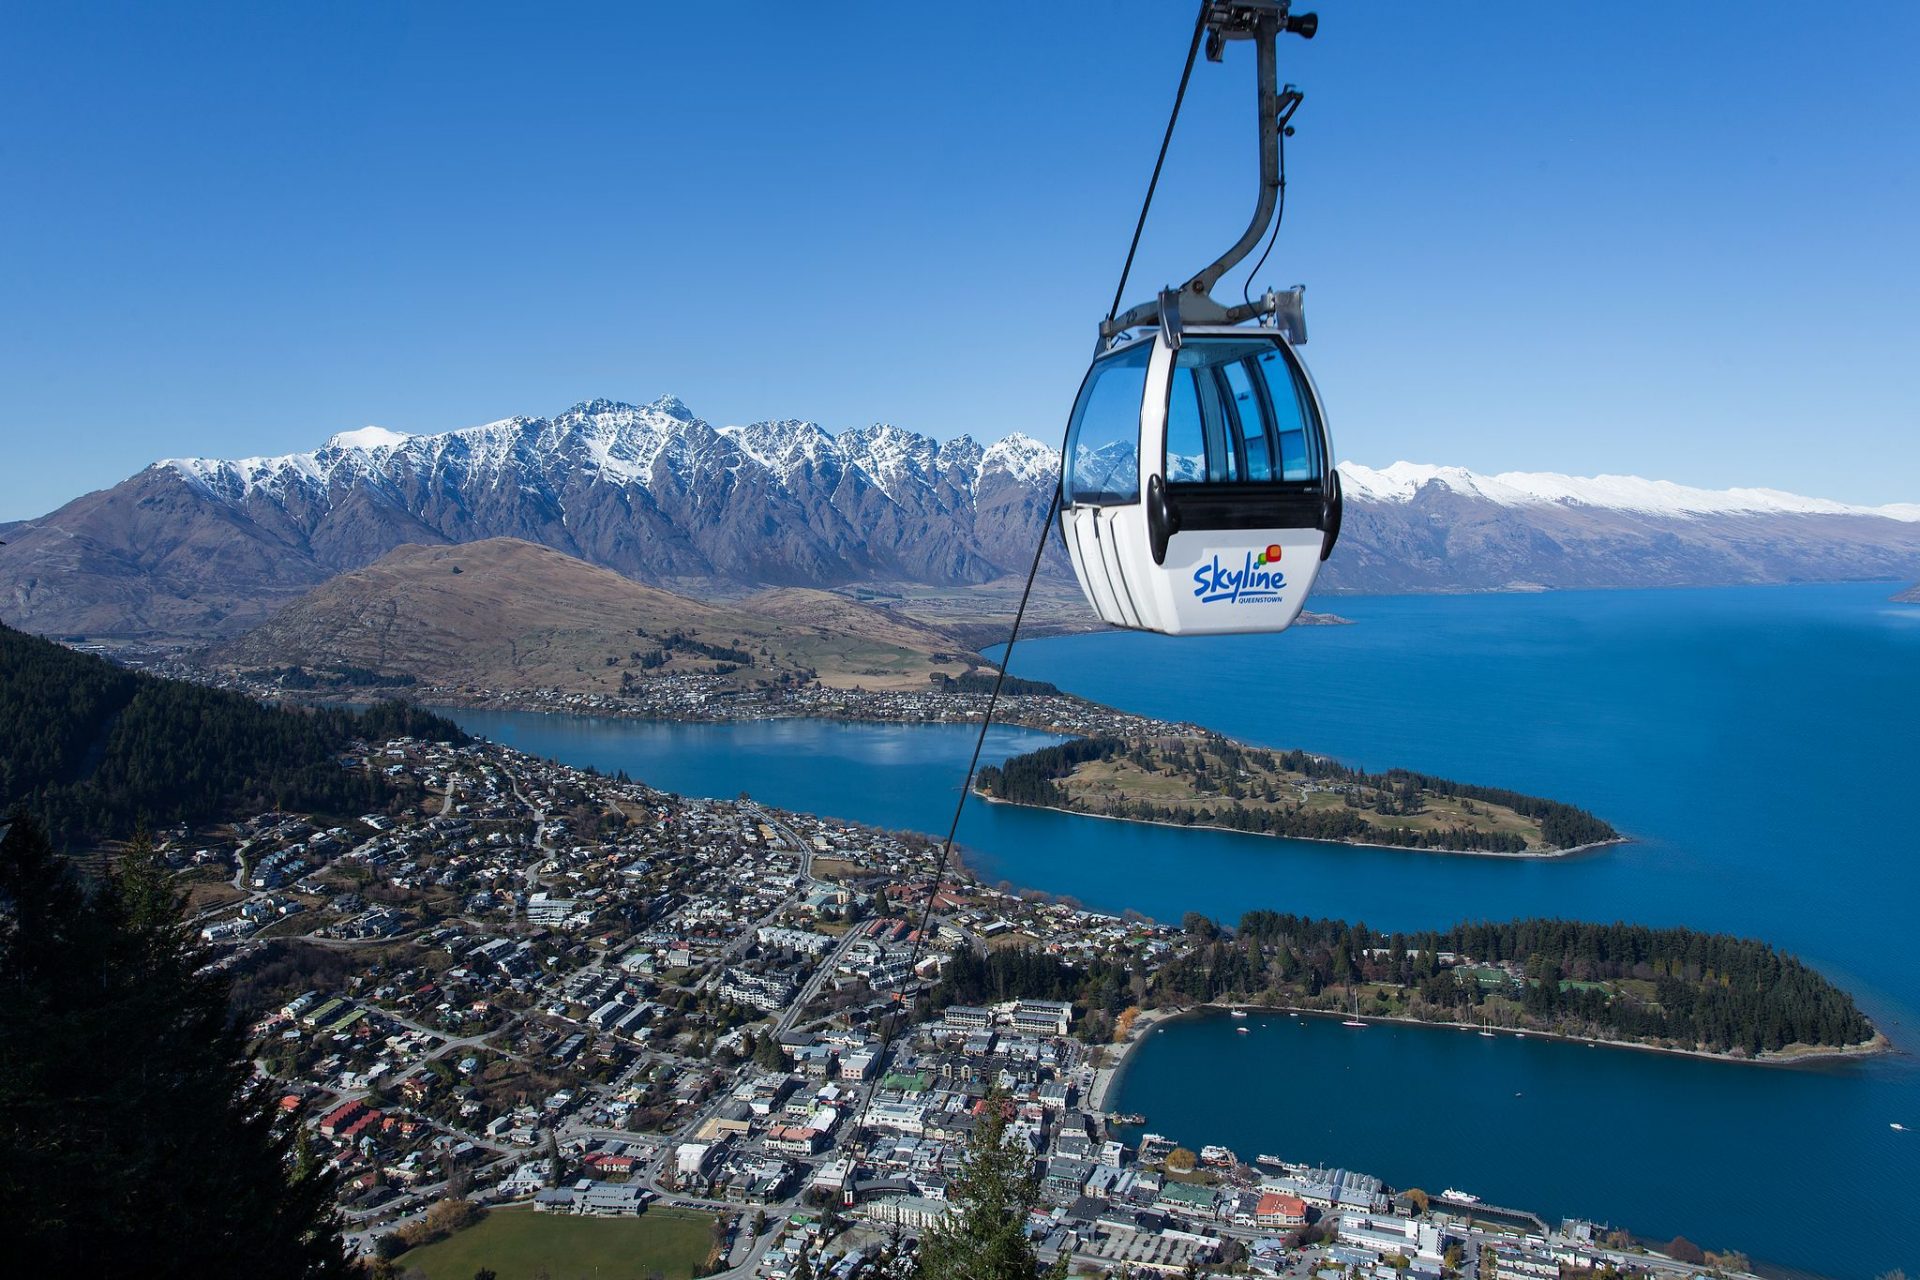 A new chairlift for Cardrona means more terrain and more exciting skiing and snowboarding on offer at this fantastic New Zealand ski resort.